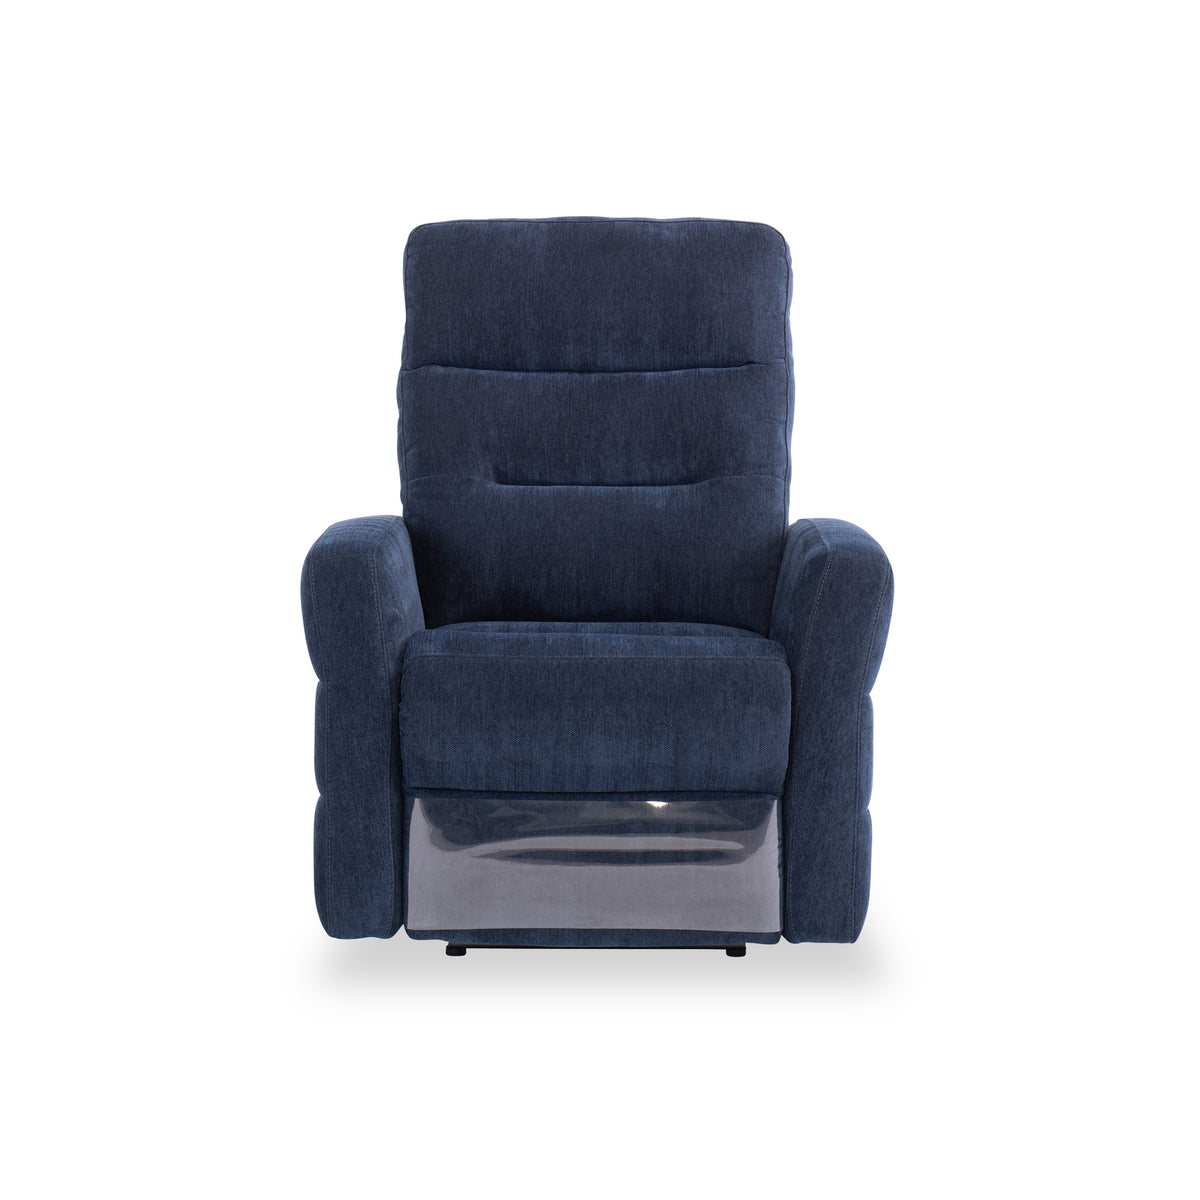 Dalton Navy Blue Fabric Electric Reclining Armchair from Roseland Furniture